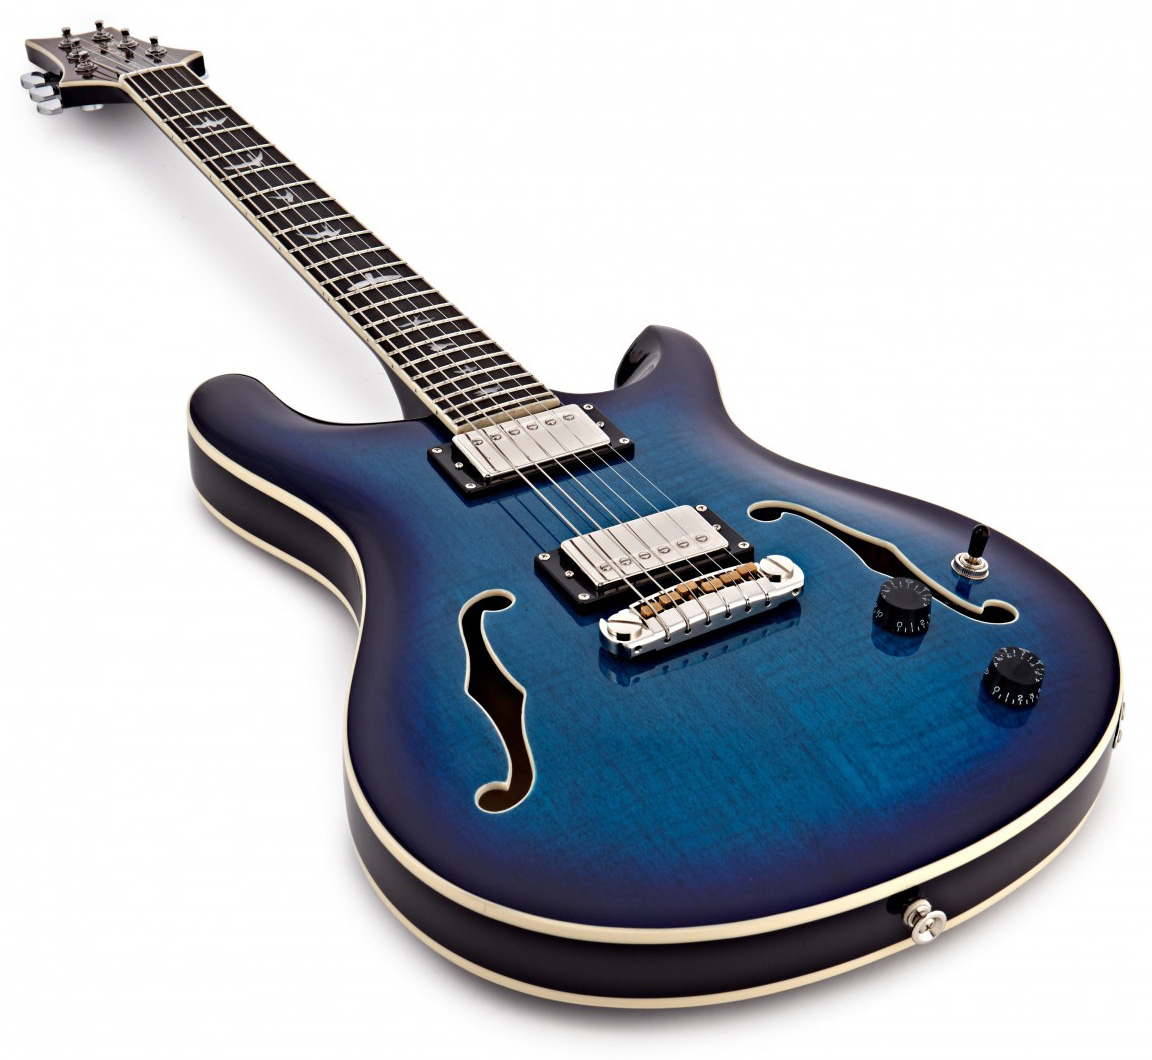 Prs Se Hollow Body Ii Hh Ht Eb - Faded Blue Burst - Semi-hollow electric guitar - Variation 2